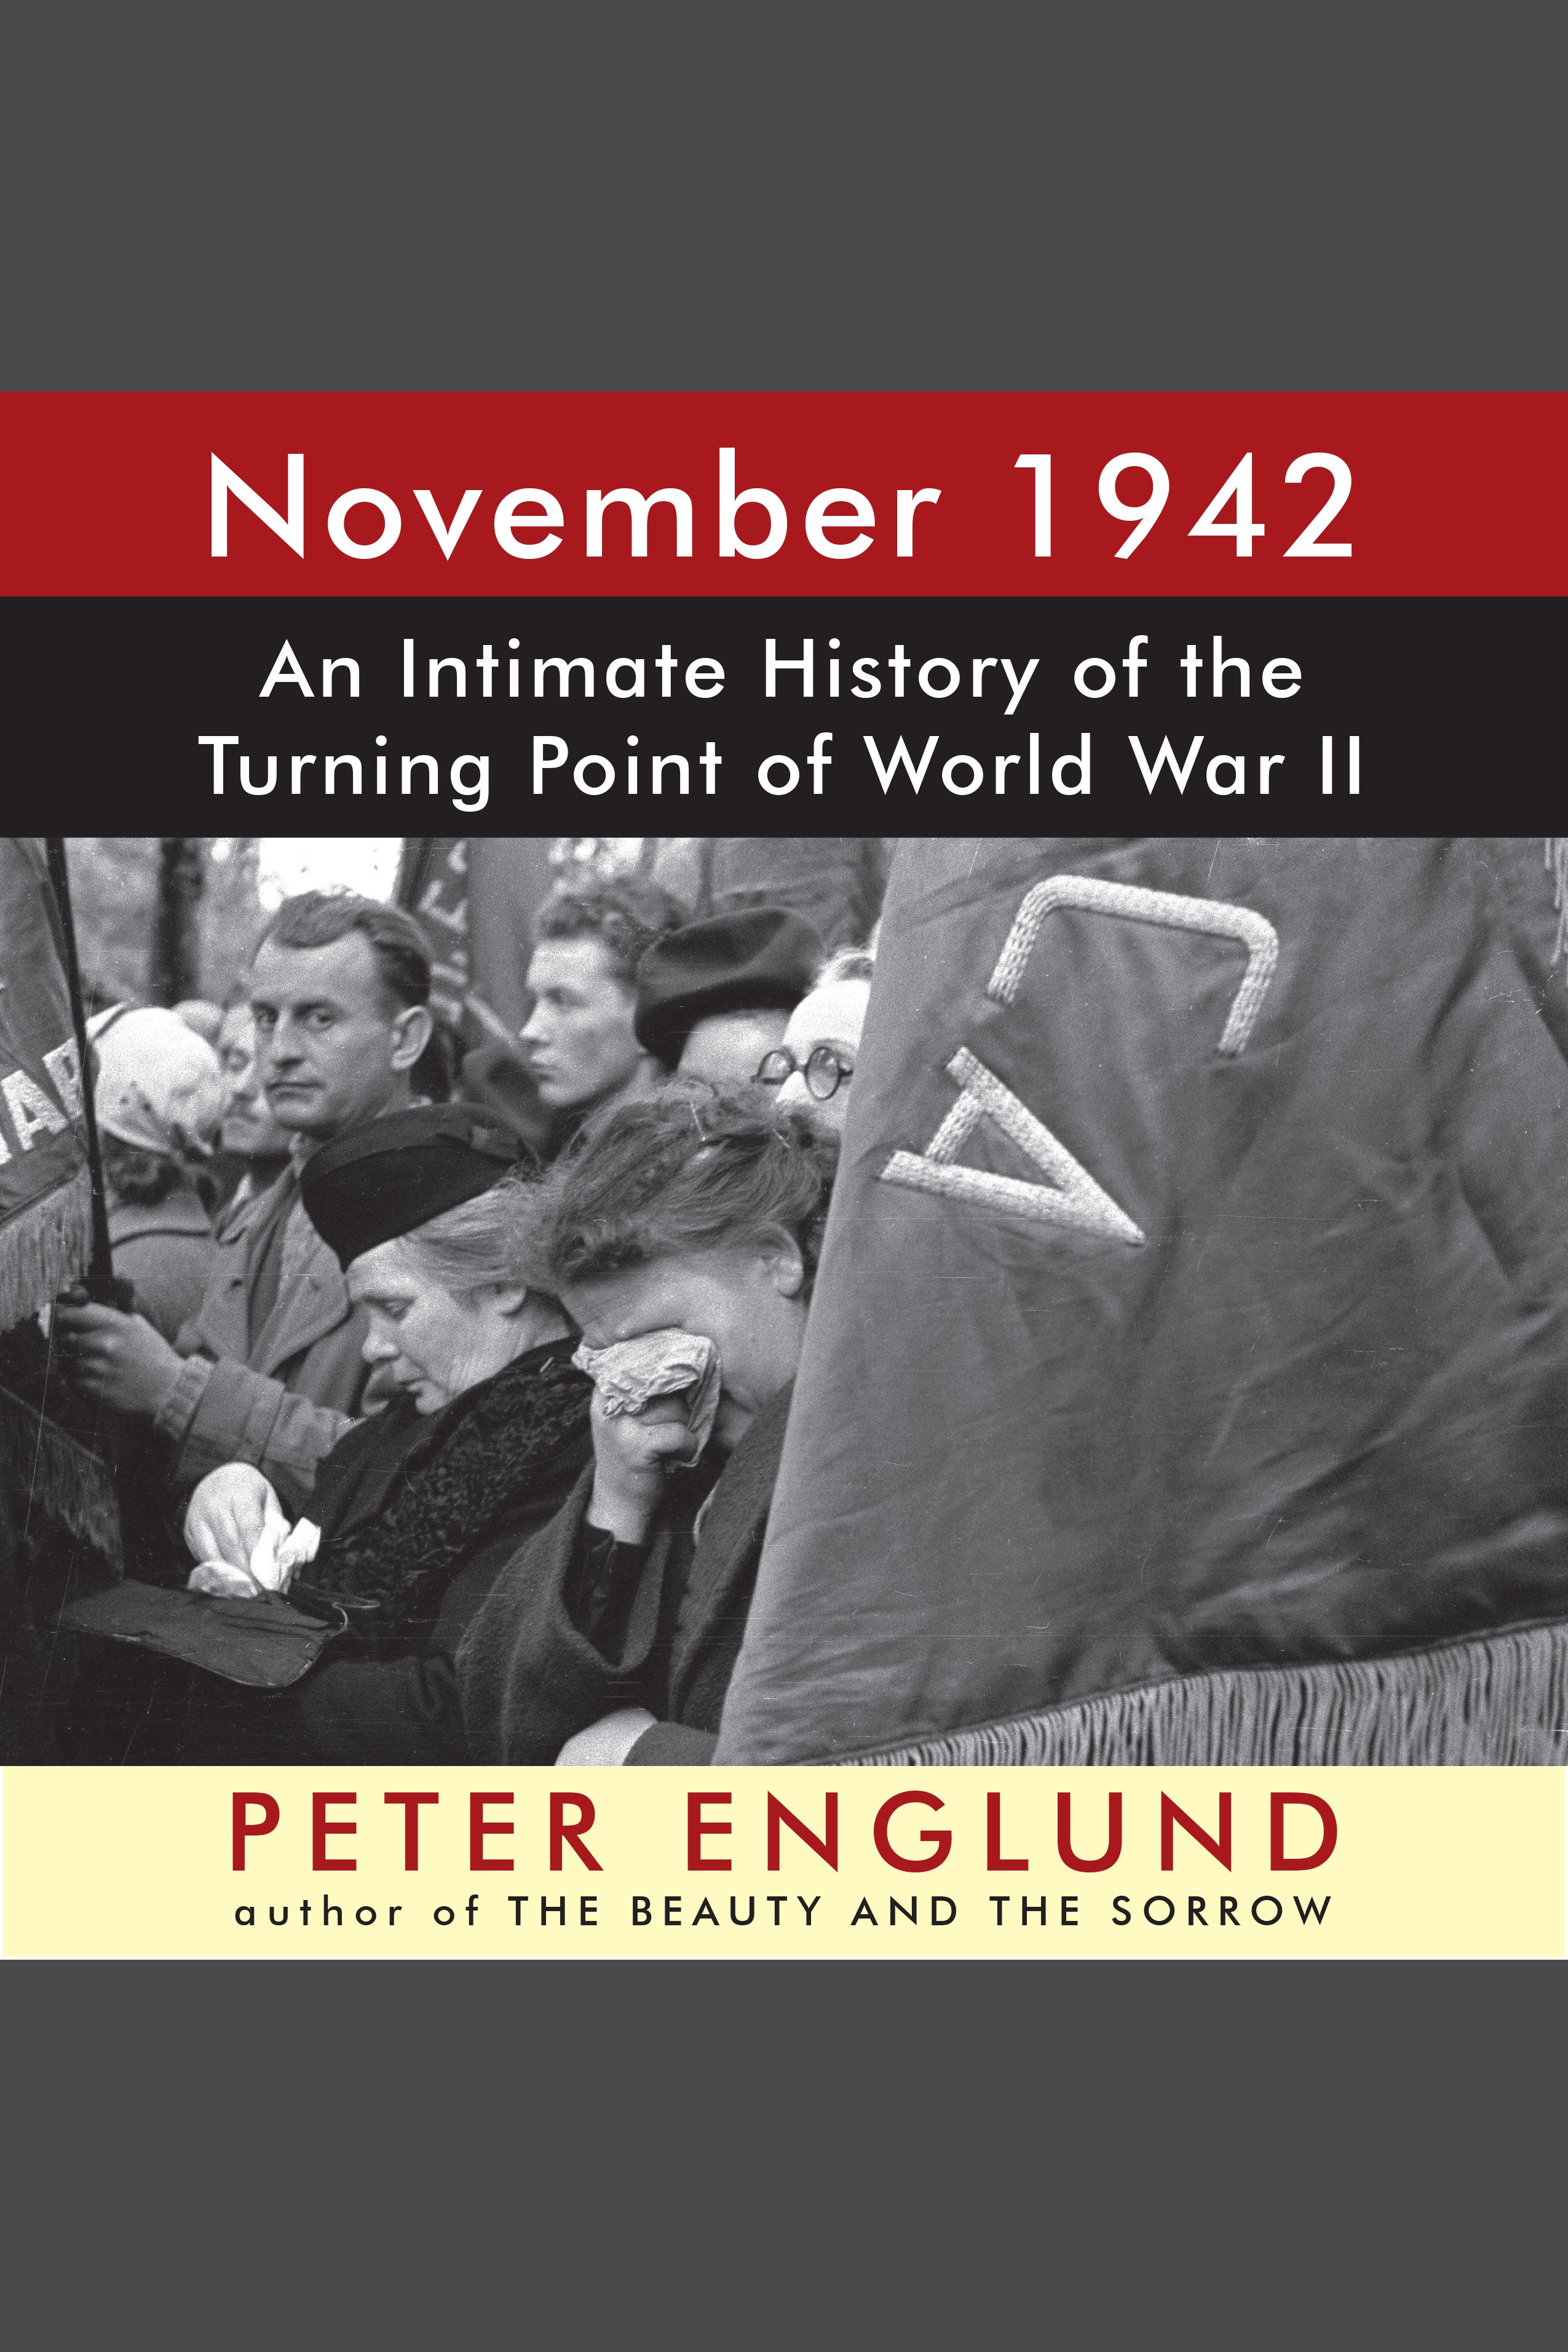 November 1942 An Intimate History of the Turning Point of World War II cover image